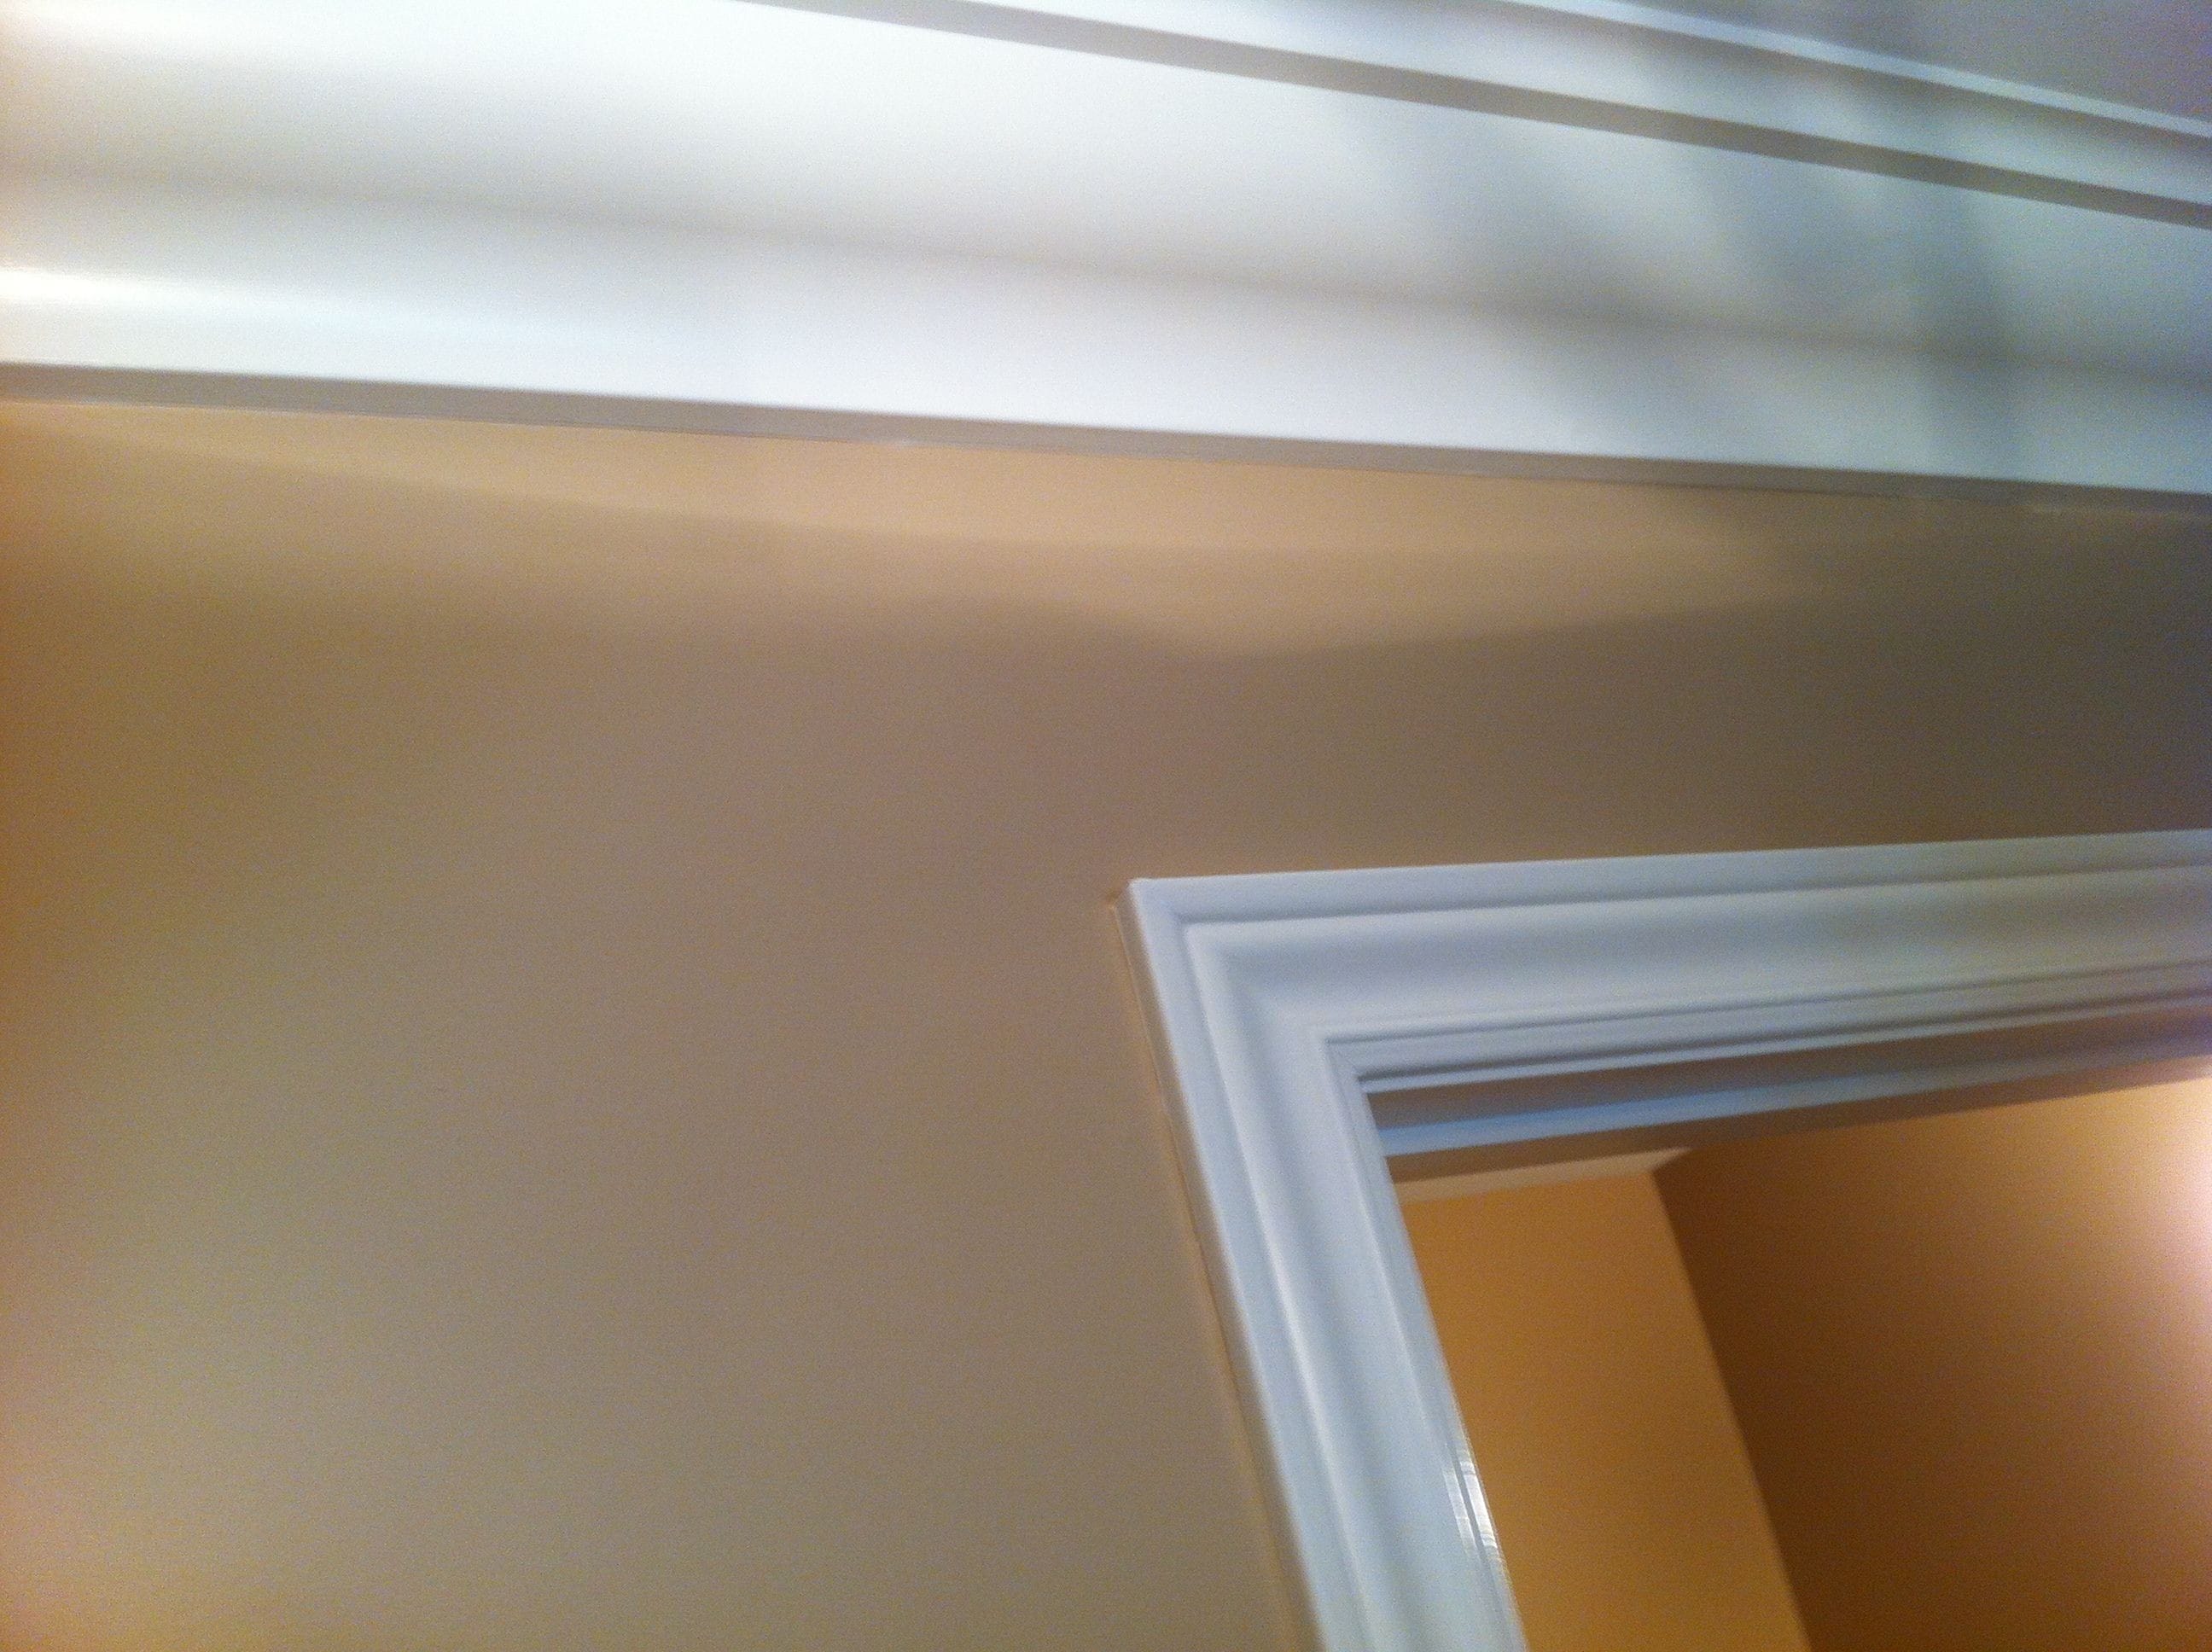 A recent painter job in the  area